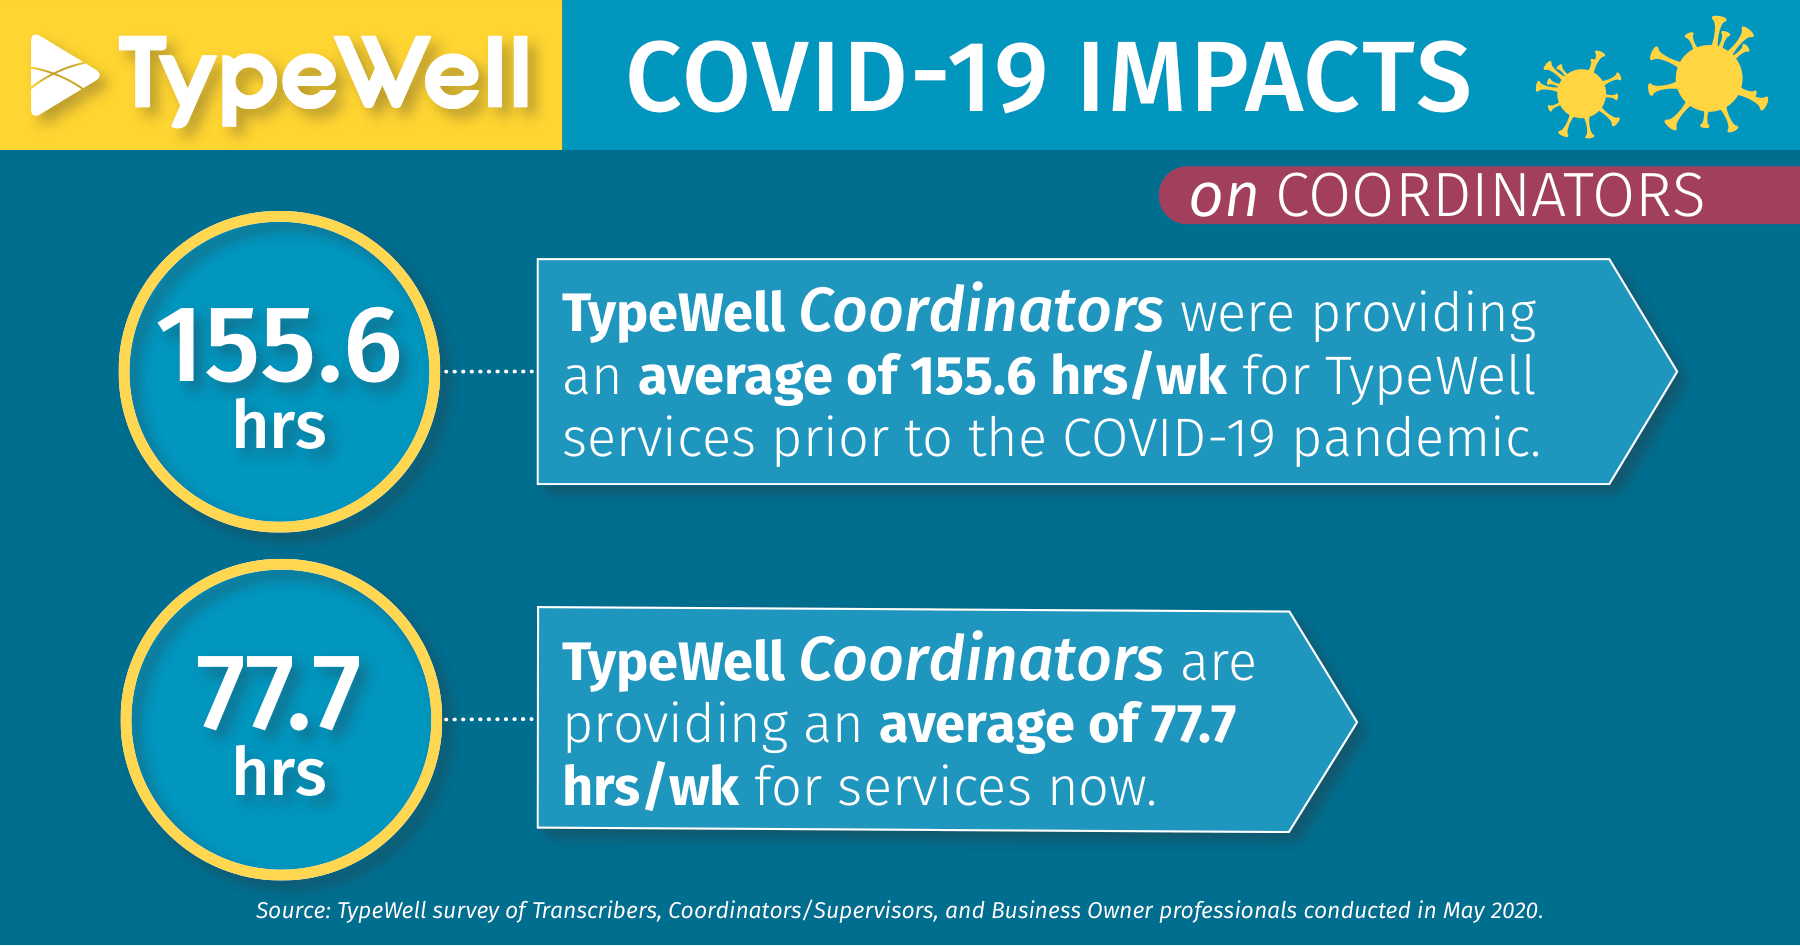 COVID-19 impacts on service coordinators: average 77.7 hours/week for TypeWell services, down from 155.6 hours/week before the pandemic.